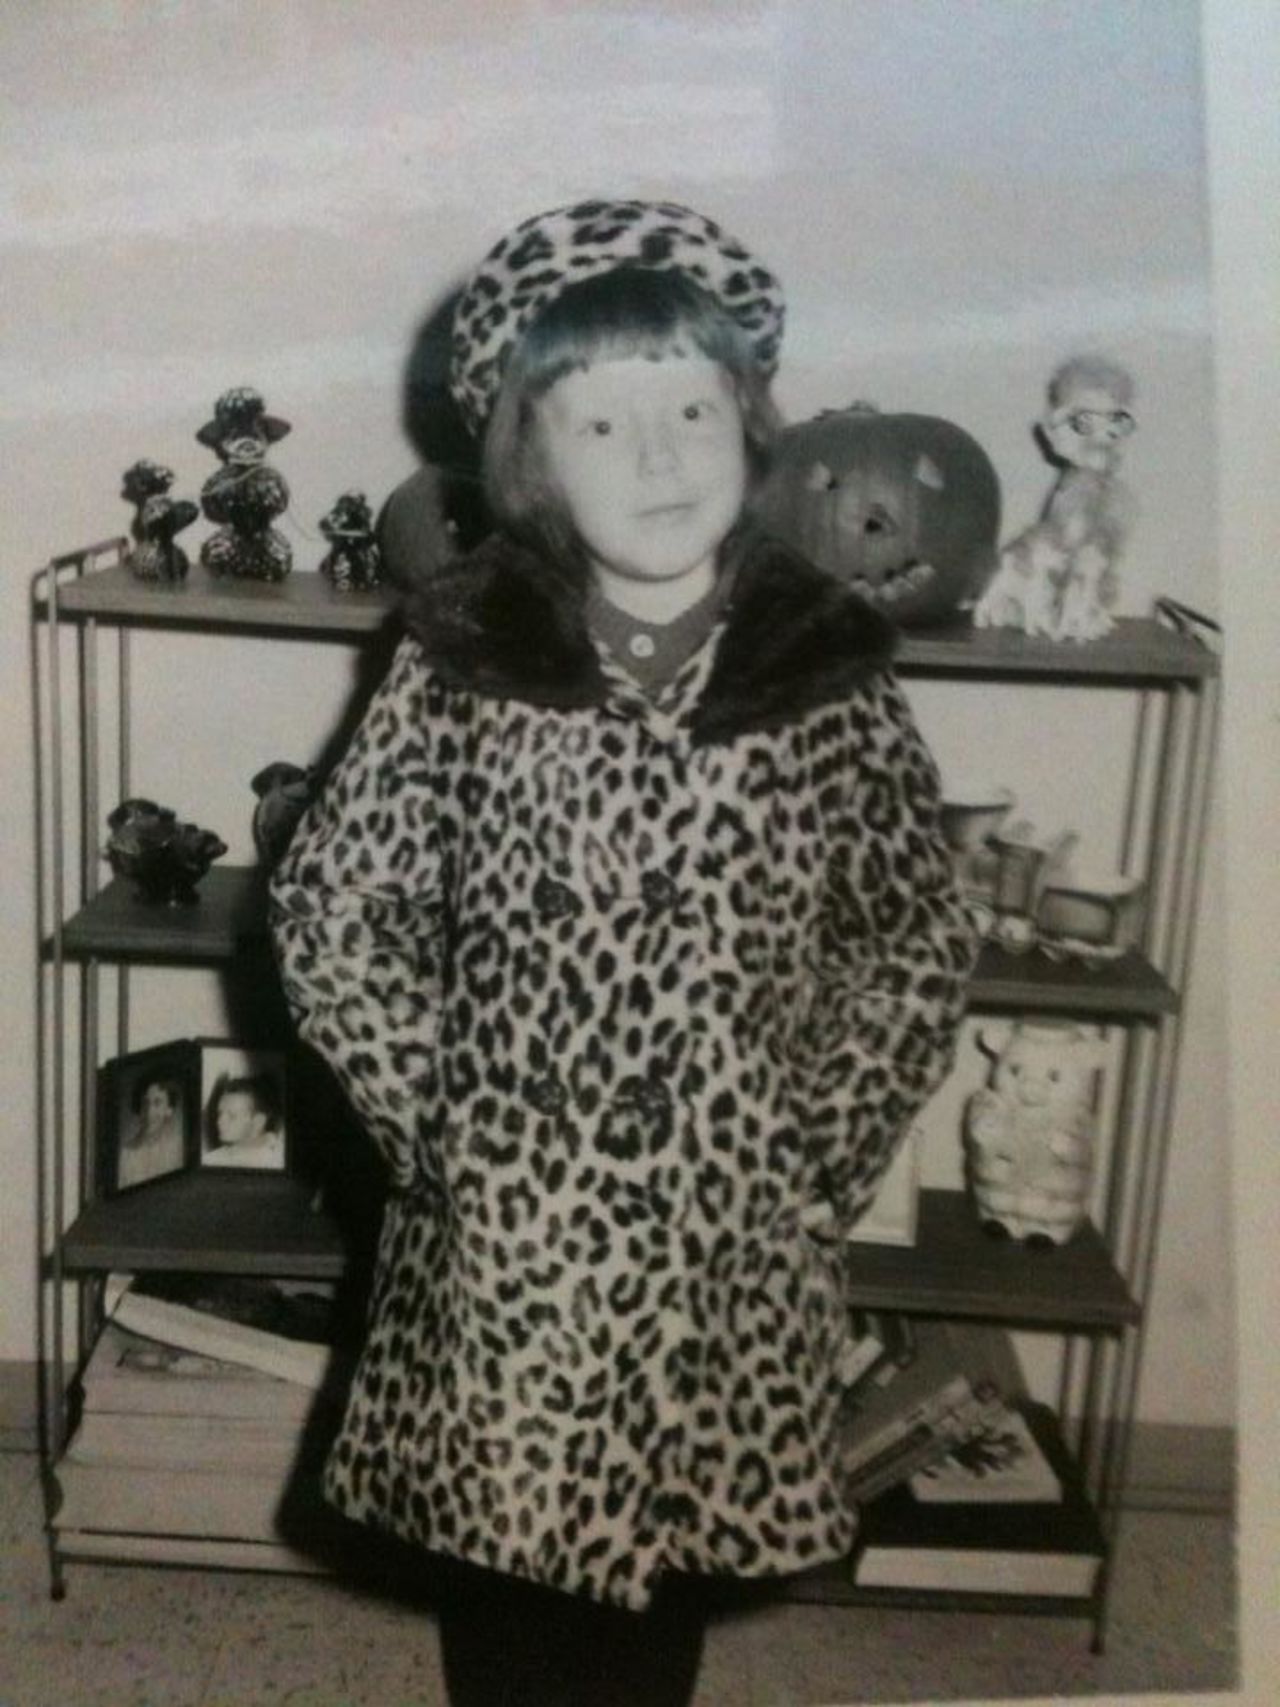 At 5 years old, <a href="http://ireport.cnn.com/docs/DOC-949032">Julie West </a>wore a matching coat and hat in 1967. "I fancied myself a movie star or model wearing them," she says. "My mom really liked to dress nicely. Once she settled into her life in Chicago, she loved to shop and always made sure we wore the latest fashions."